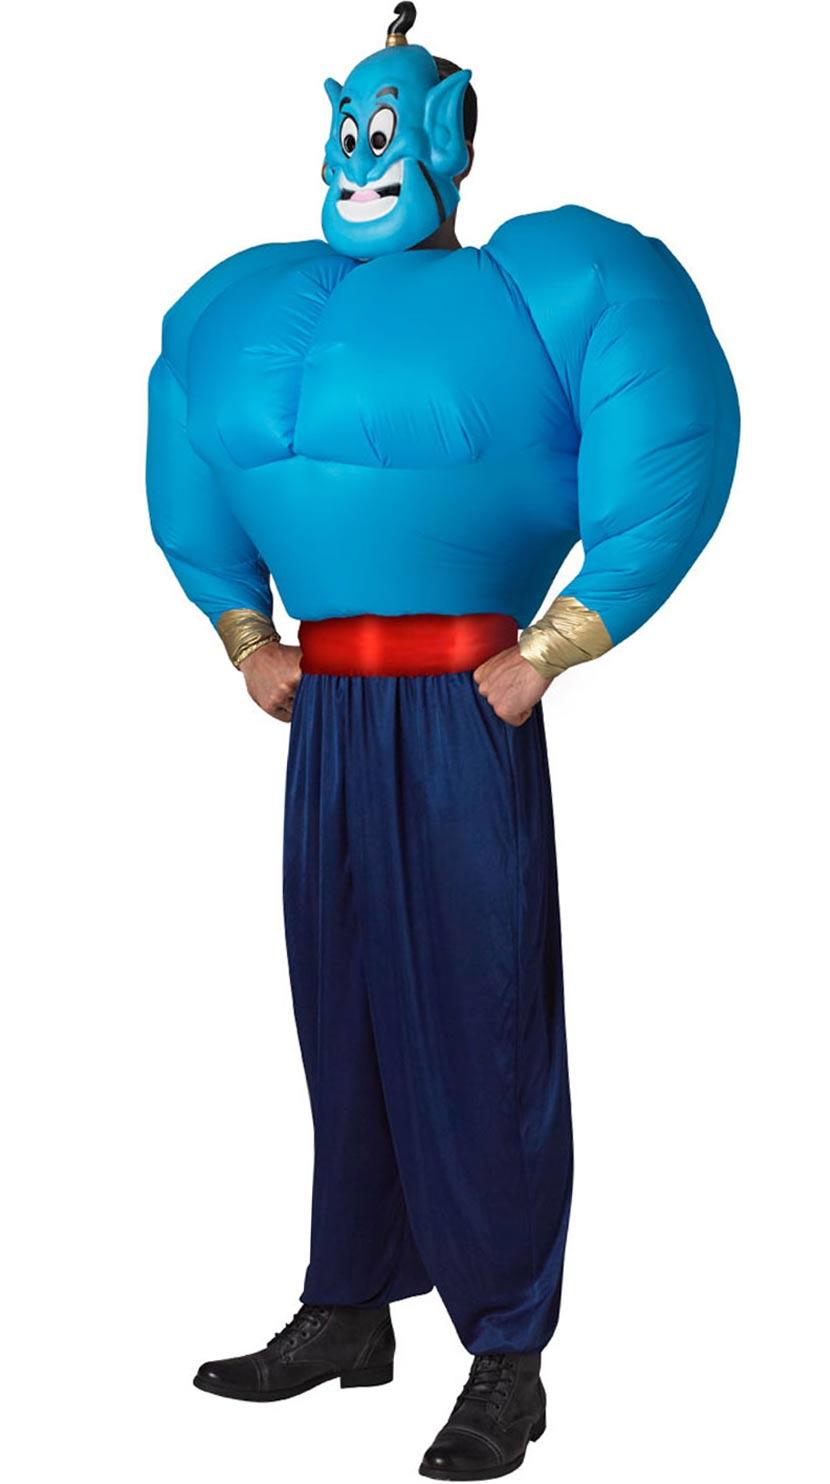 Disney's Aladdin Inflatable Genie Costume for Adults by Rubies 888839 available from Karnival Costumes online party shop